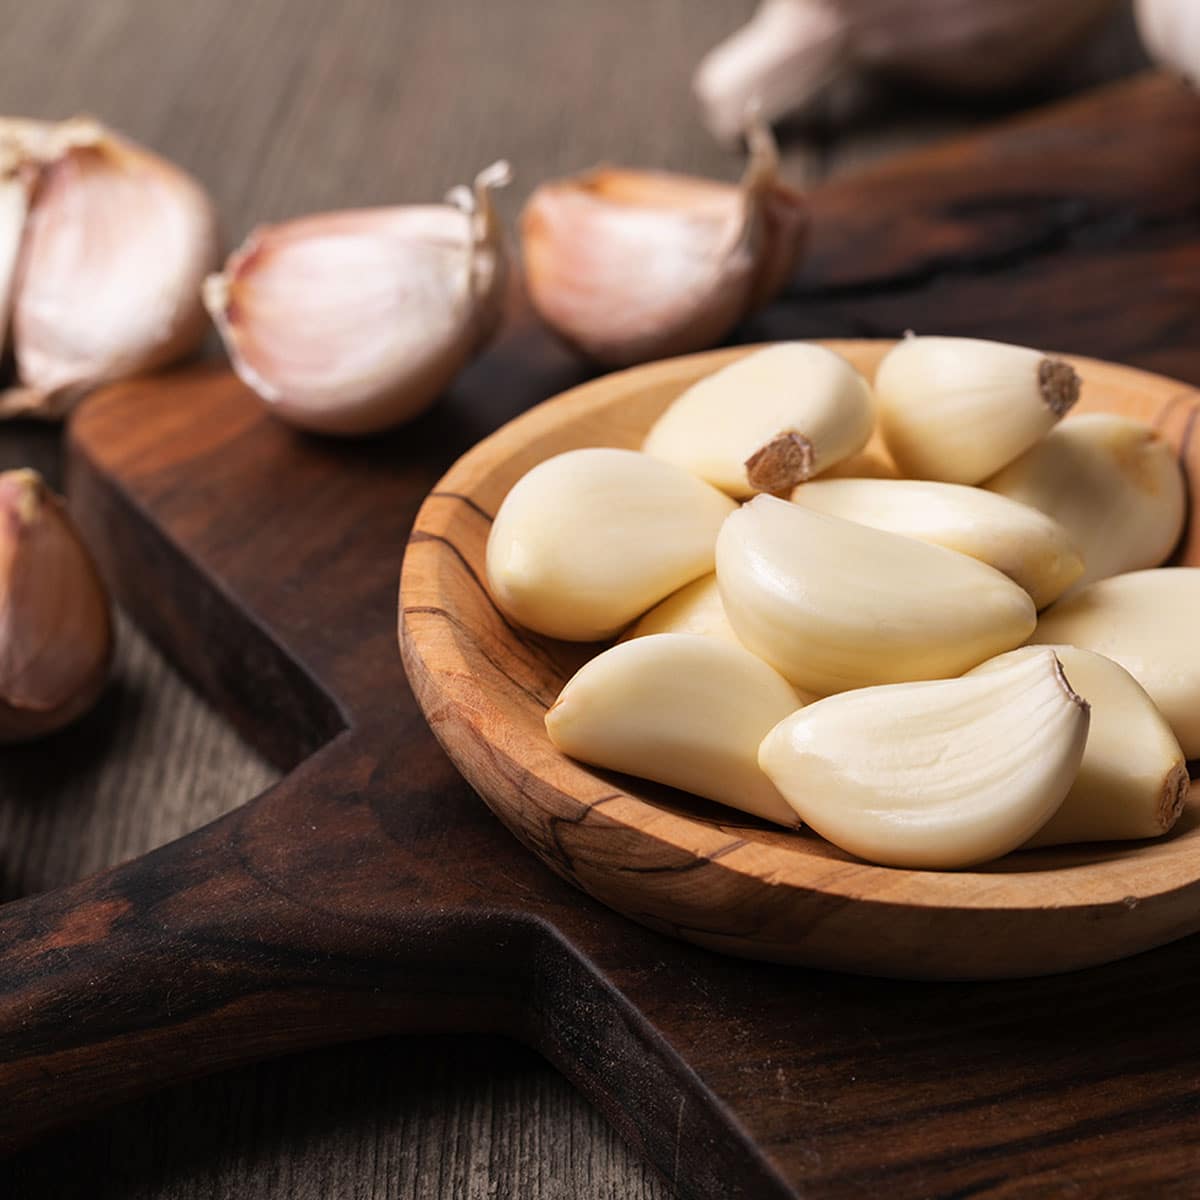 Saving a dish that has had too much garlic added is not rocket science. Learn a few tips to help out when you've had an overzealous garlic attack.